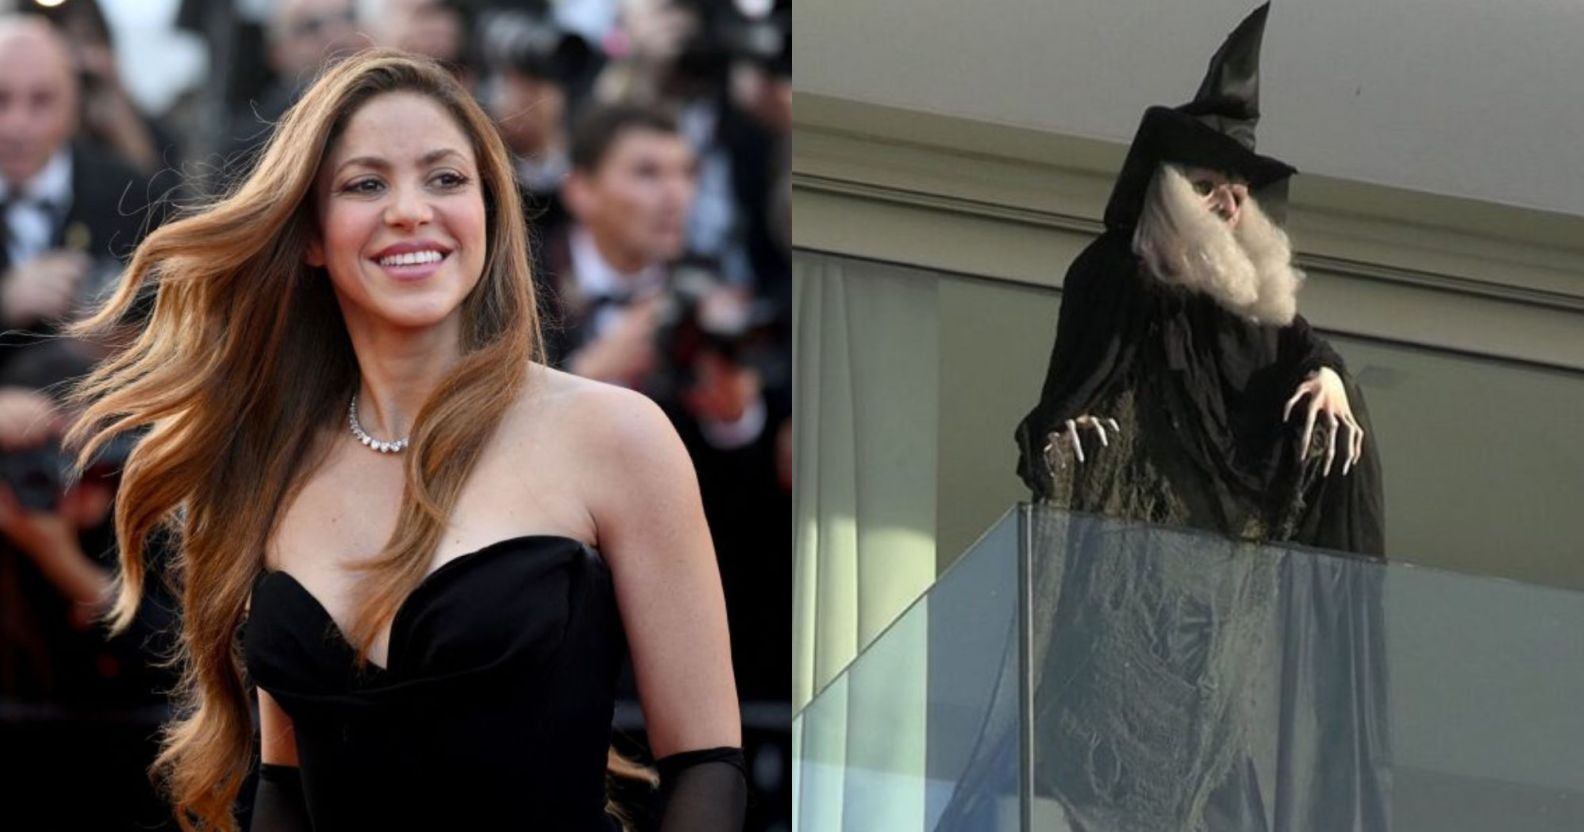 On the left, Shakira is pictured wearing a plunging black gown at a film festival in 2022. On the right is a picture of a witch mannequin that's been spotted on the singer's balcony in her Barcelona home.